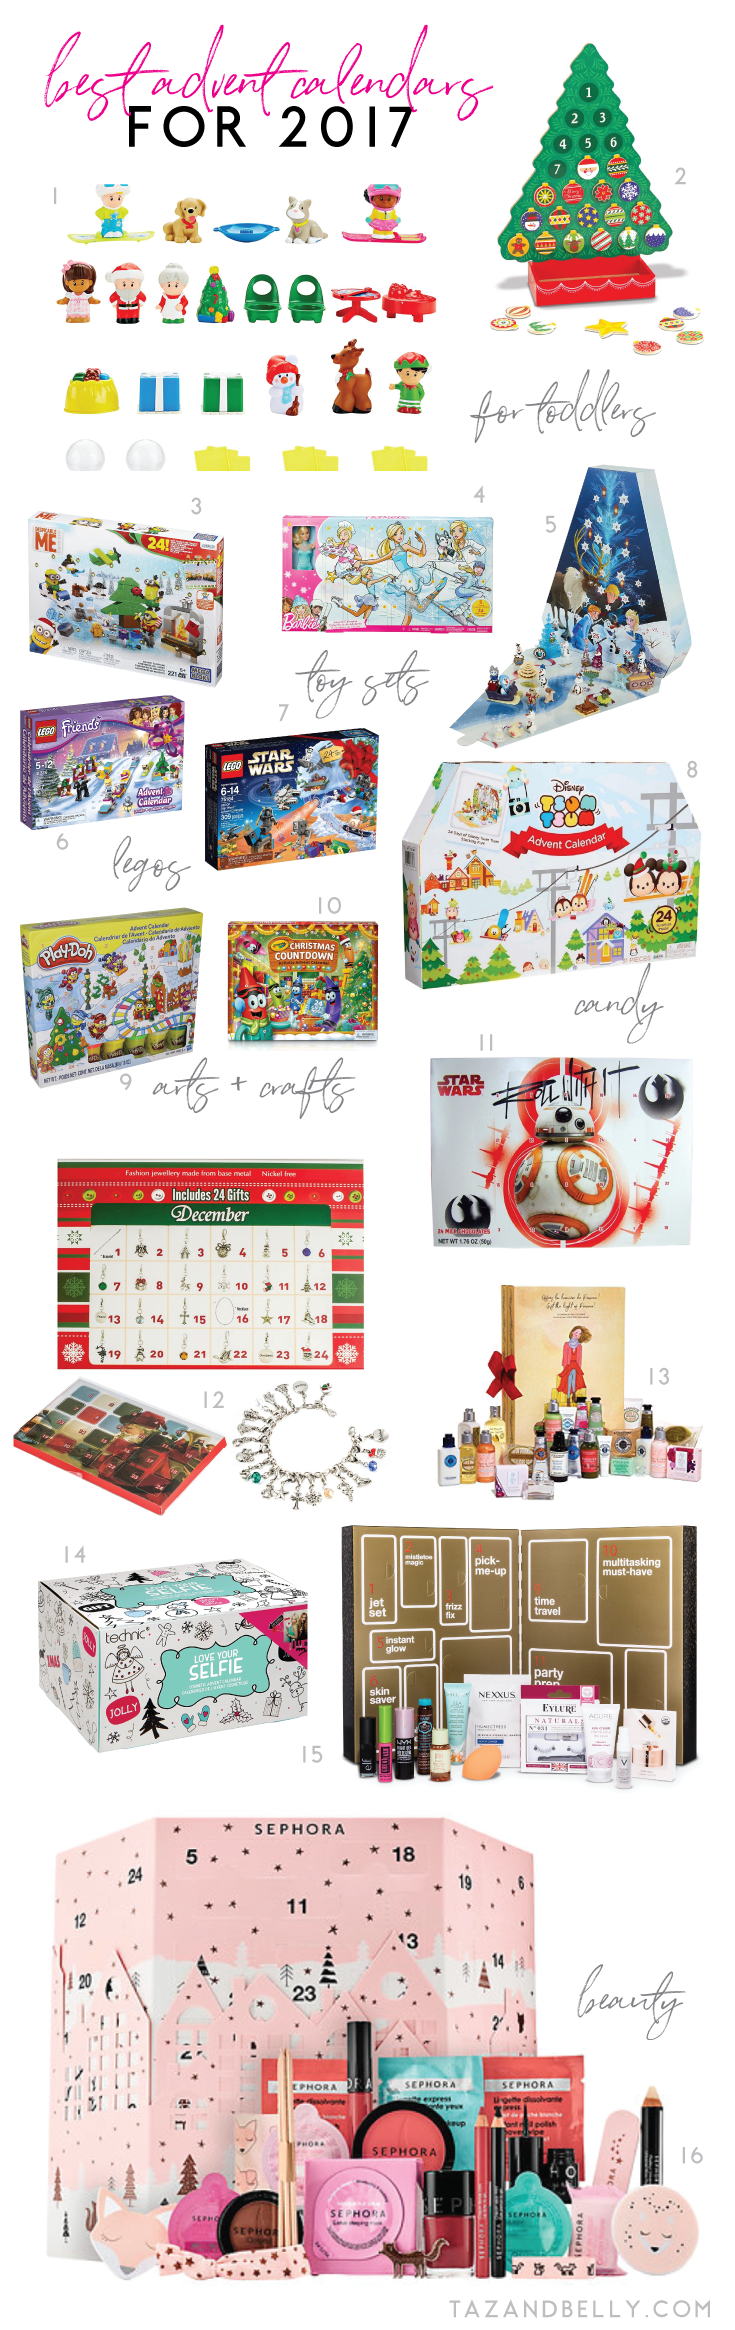 16 of the Best Advent Calendars for Christmas this year! | tazandbelly.com